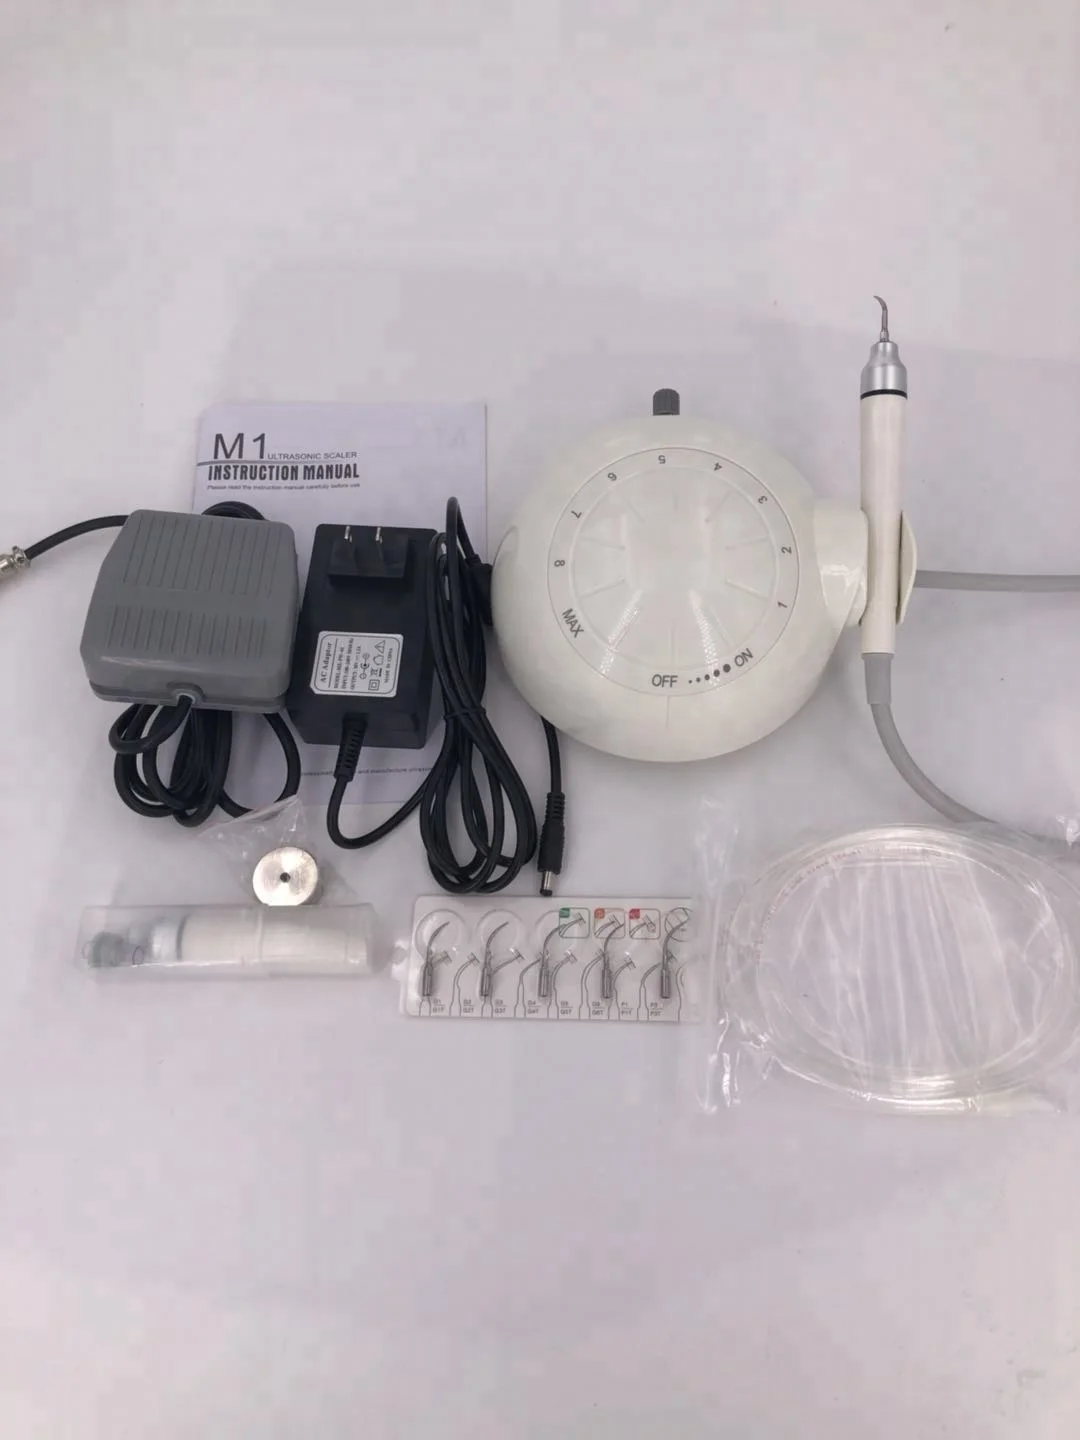 
High quality low price Dental ultrasonic scaler with LED 